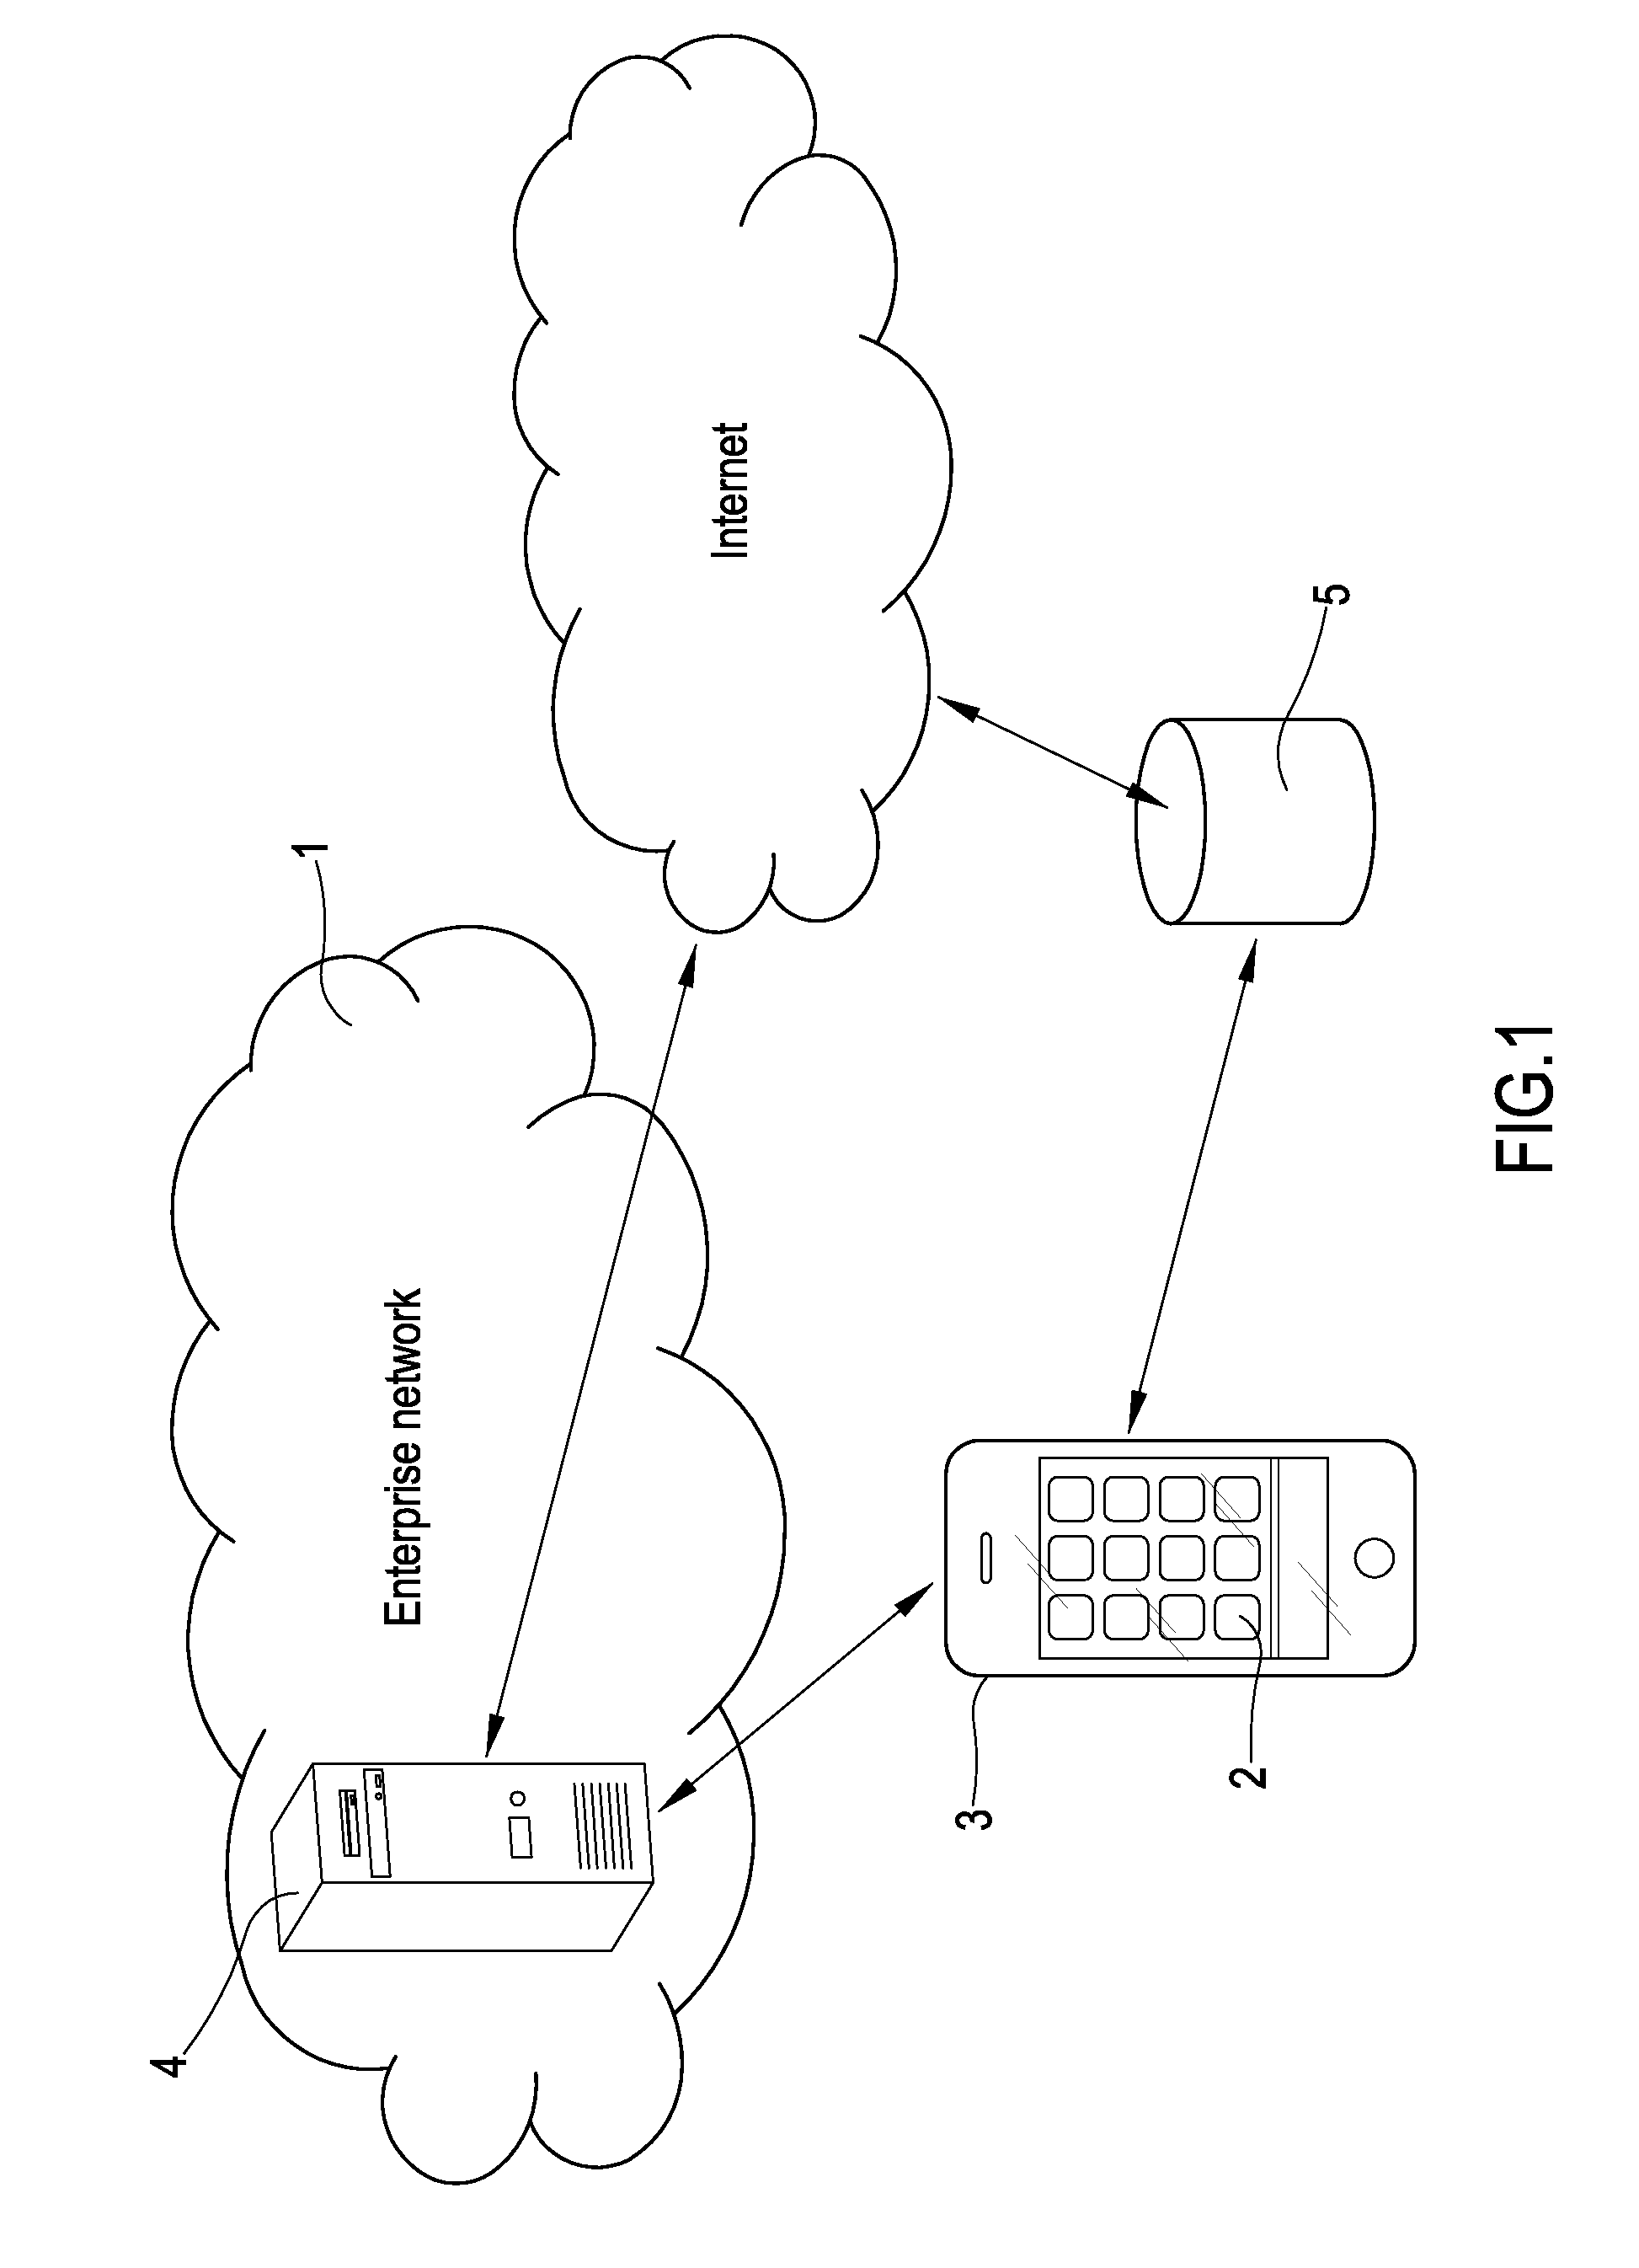 Managment system of the resources of an access connection provided by an enterprise